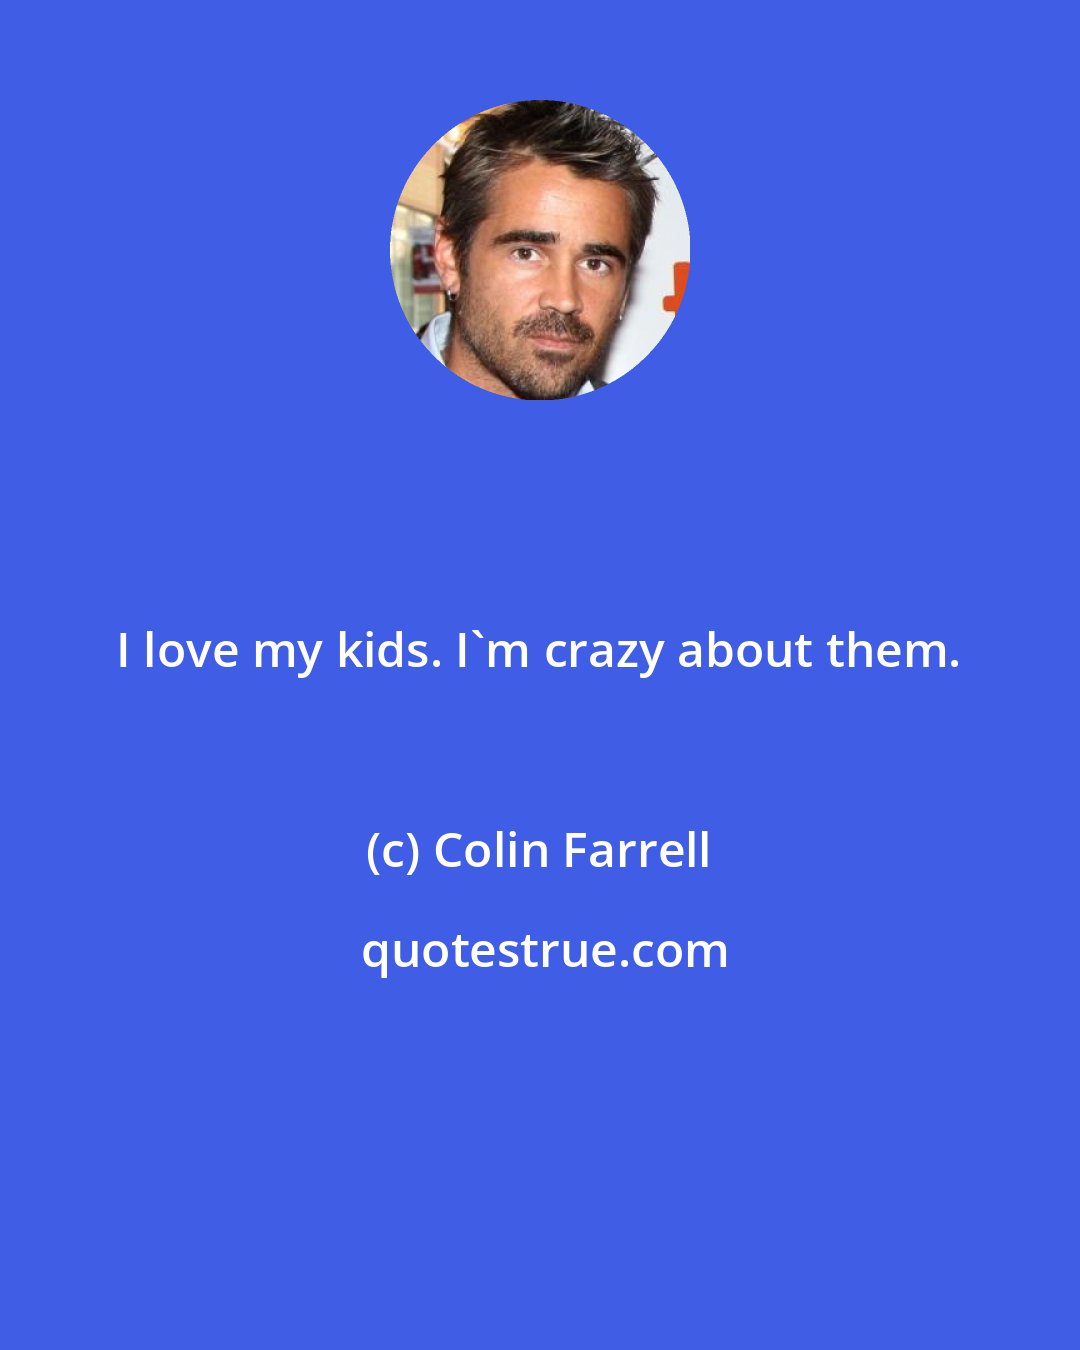 Colin Farrell: I love my kids. I'm crazy about them.